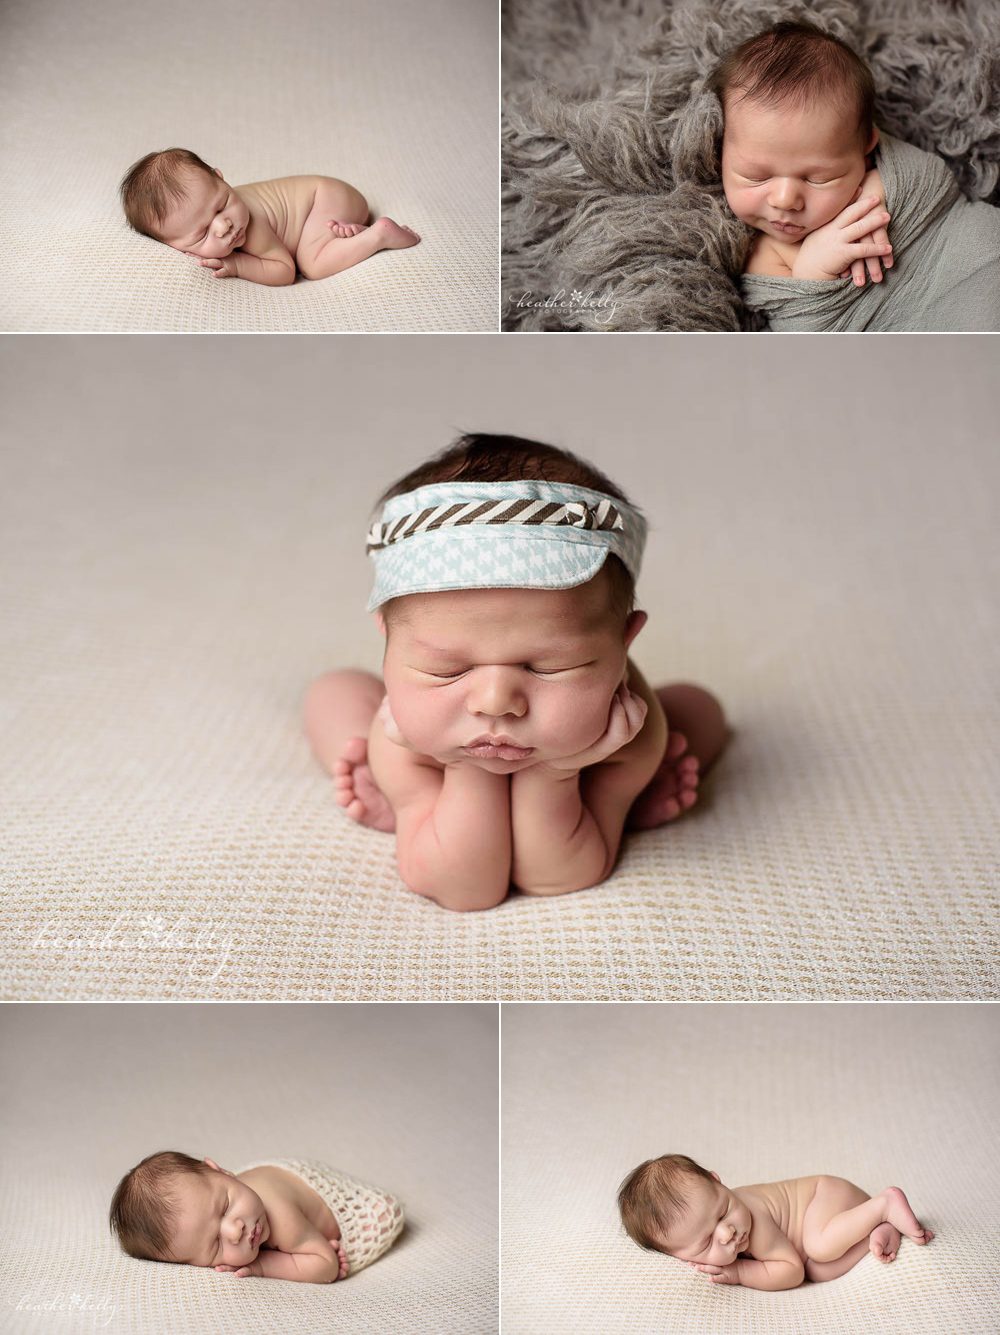 5 newborn images from a petite newborn photography session by Heather Kelly Photography. A CT newborn photographer. 